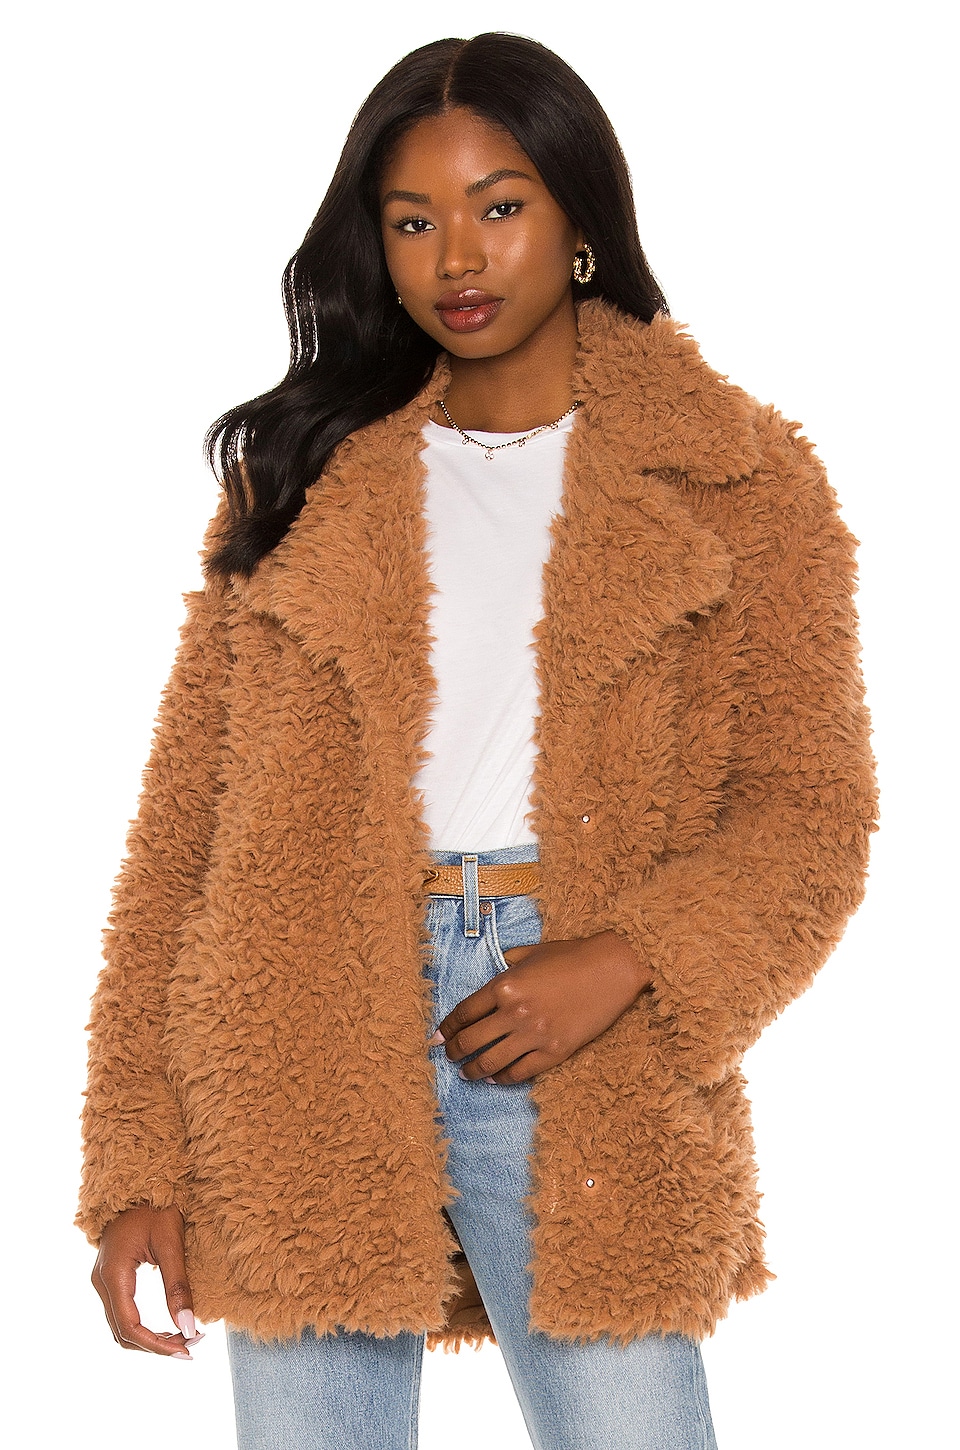 Steve Madden What's The Fuzz About Faux Fur Coat in Camel | REVOLVE